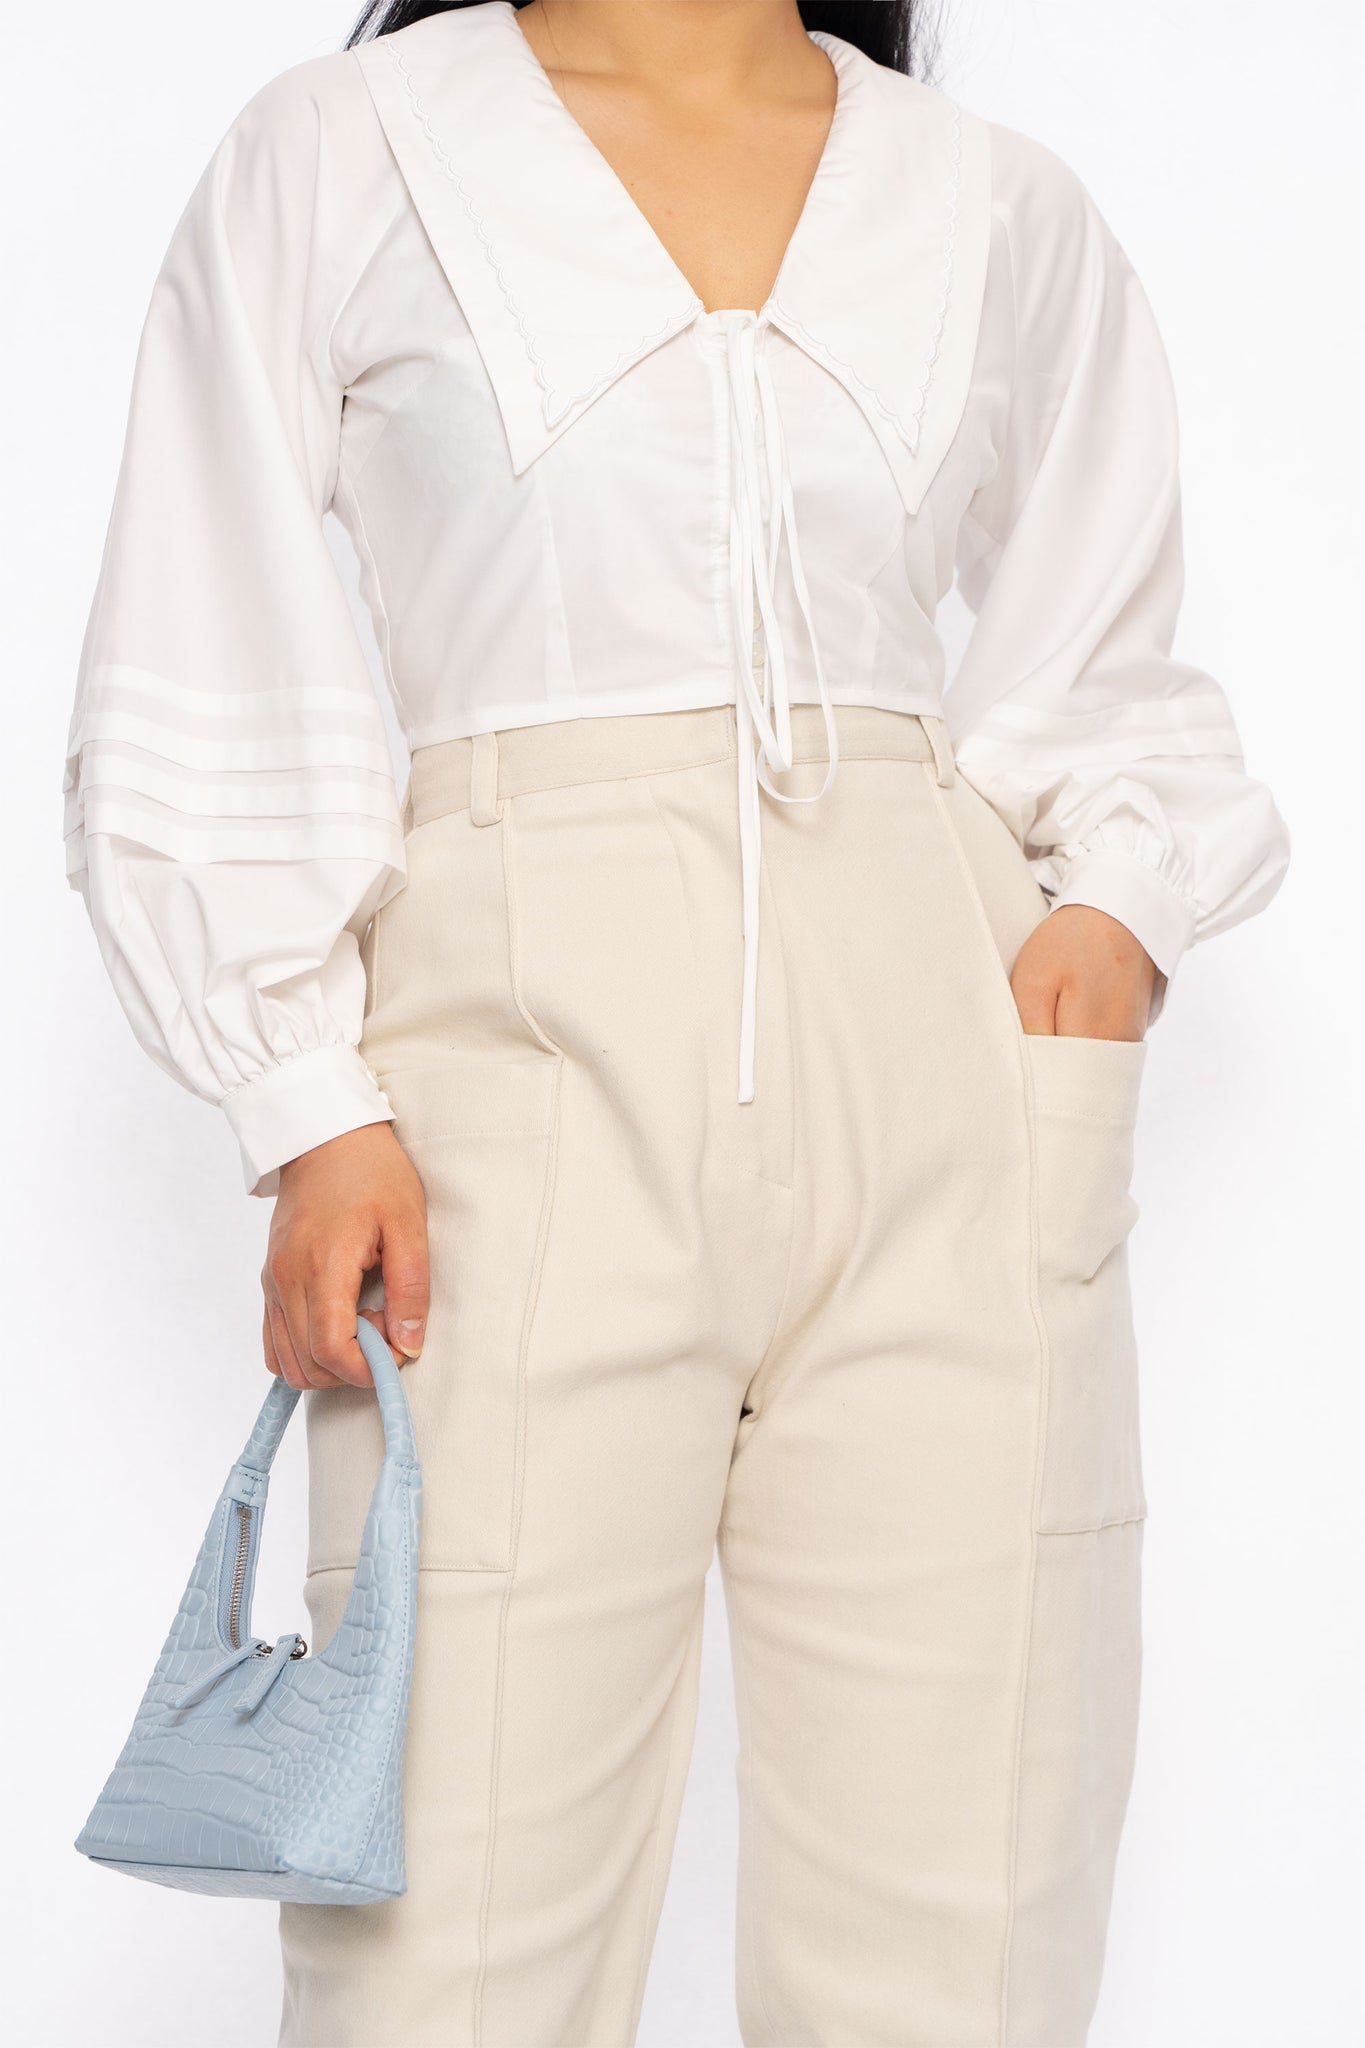 DEAR JOSÉ LILY OF THE VALLY CROPPED BLOUSE